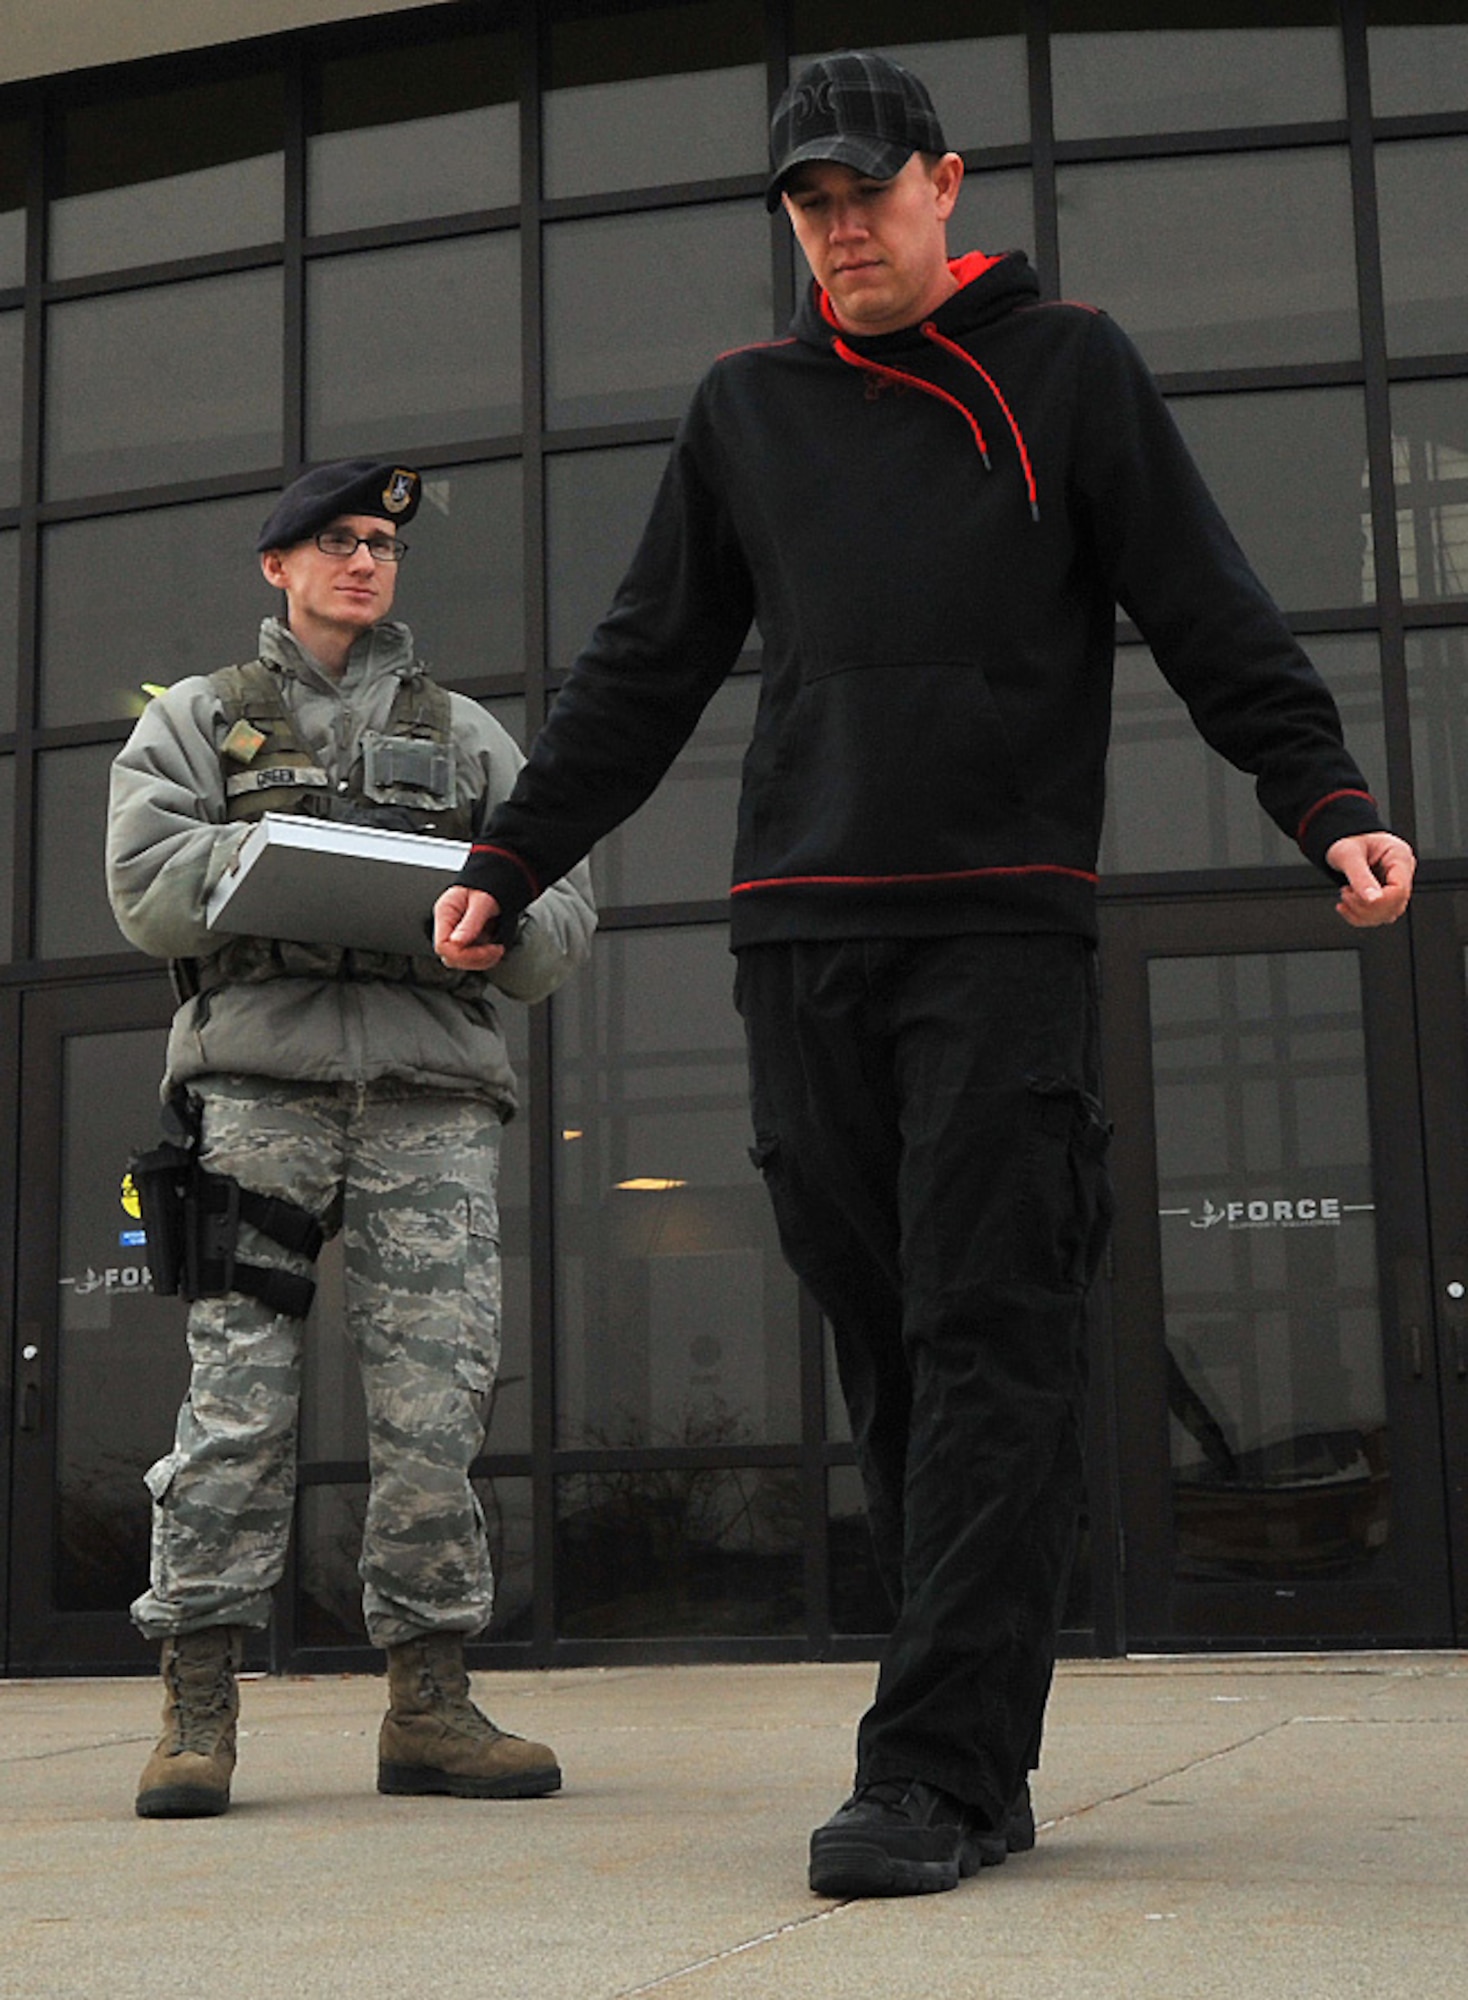 Senior Airman Caleb Green and Airman Bryce Willsey simulate the walk-and-turn portion of the field sobriety test Dec. 10, 2014, on Grand Forks Air Force Base, N.D. The FST consists of three different portions and is used to test a subject who is believed to be intoxicated. During the walk-and-turn portion, the subject is asked to walk nine steps in a straight line, heel-to-toe, and then turn around and walk in the opposite direction in the same fashion with the same number of steps. Green is a 319th Security Forces Squadron base defense operations control controller/patrolman. Willsey is a 319th SFS alarm monitor. (U.S. Air Force photo/Airman 1st Class Bonnie Grantham)